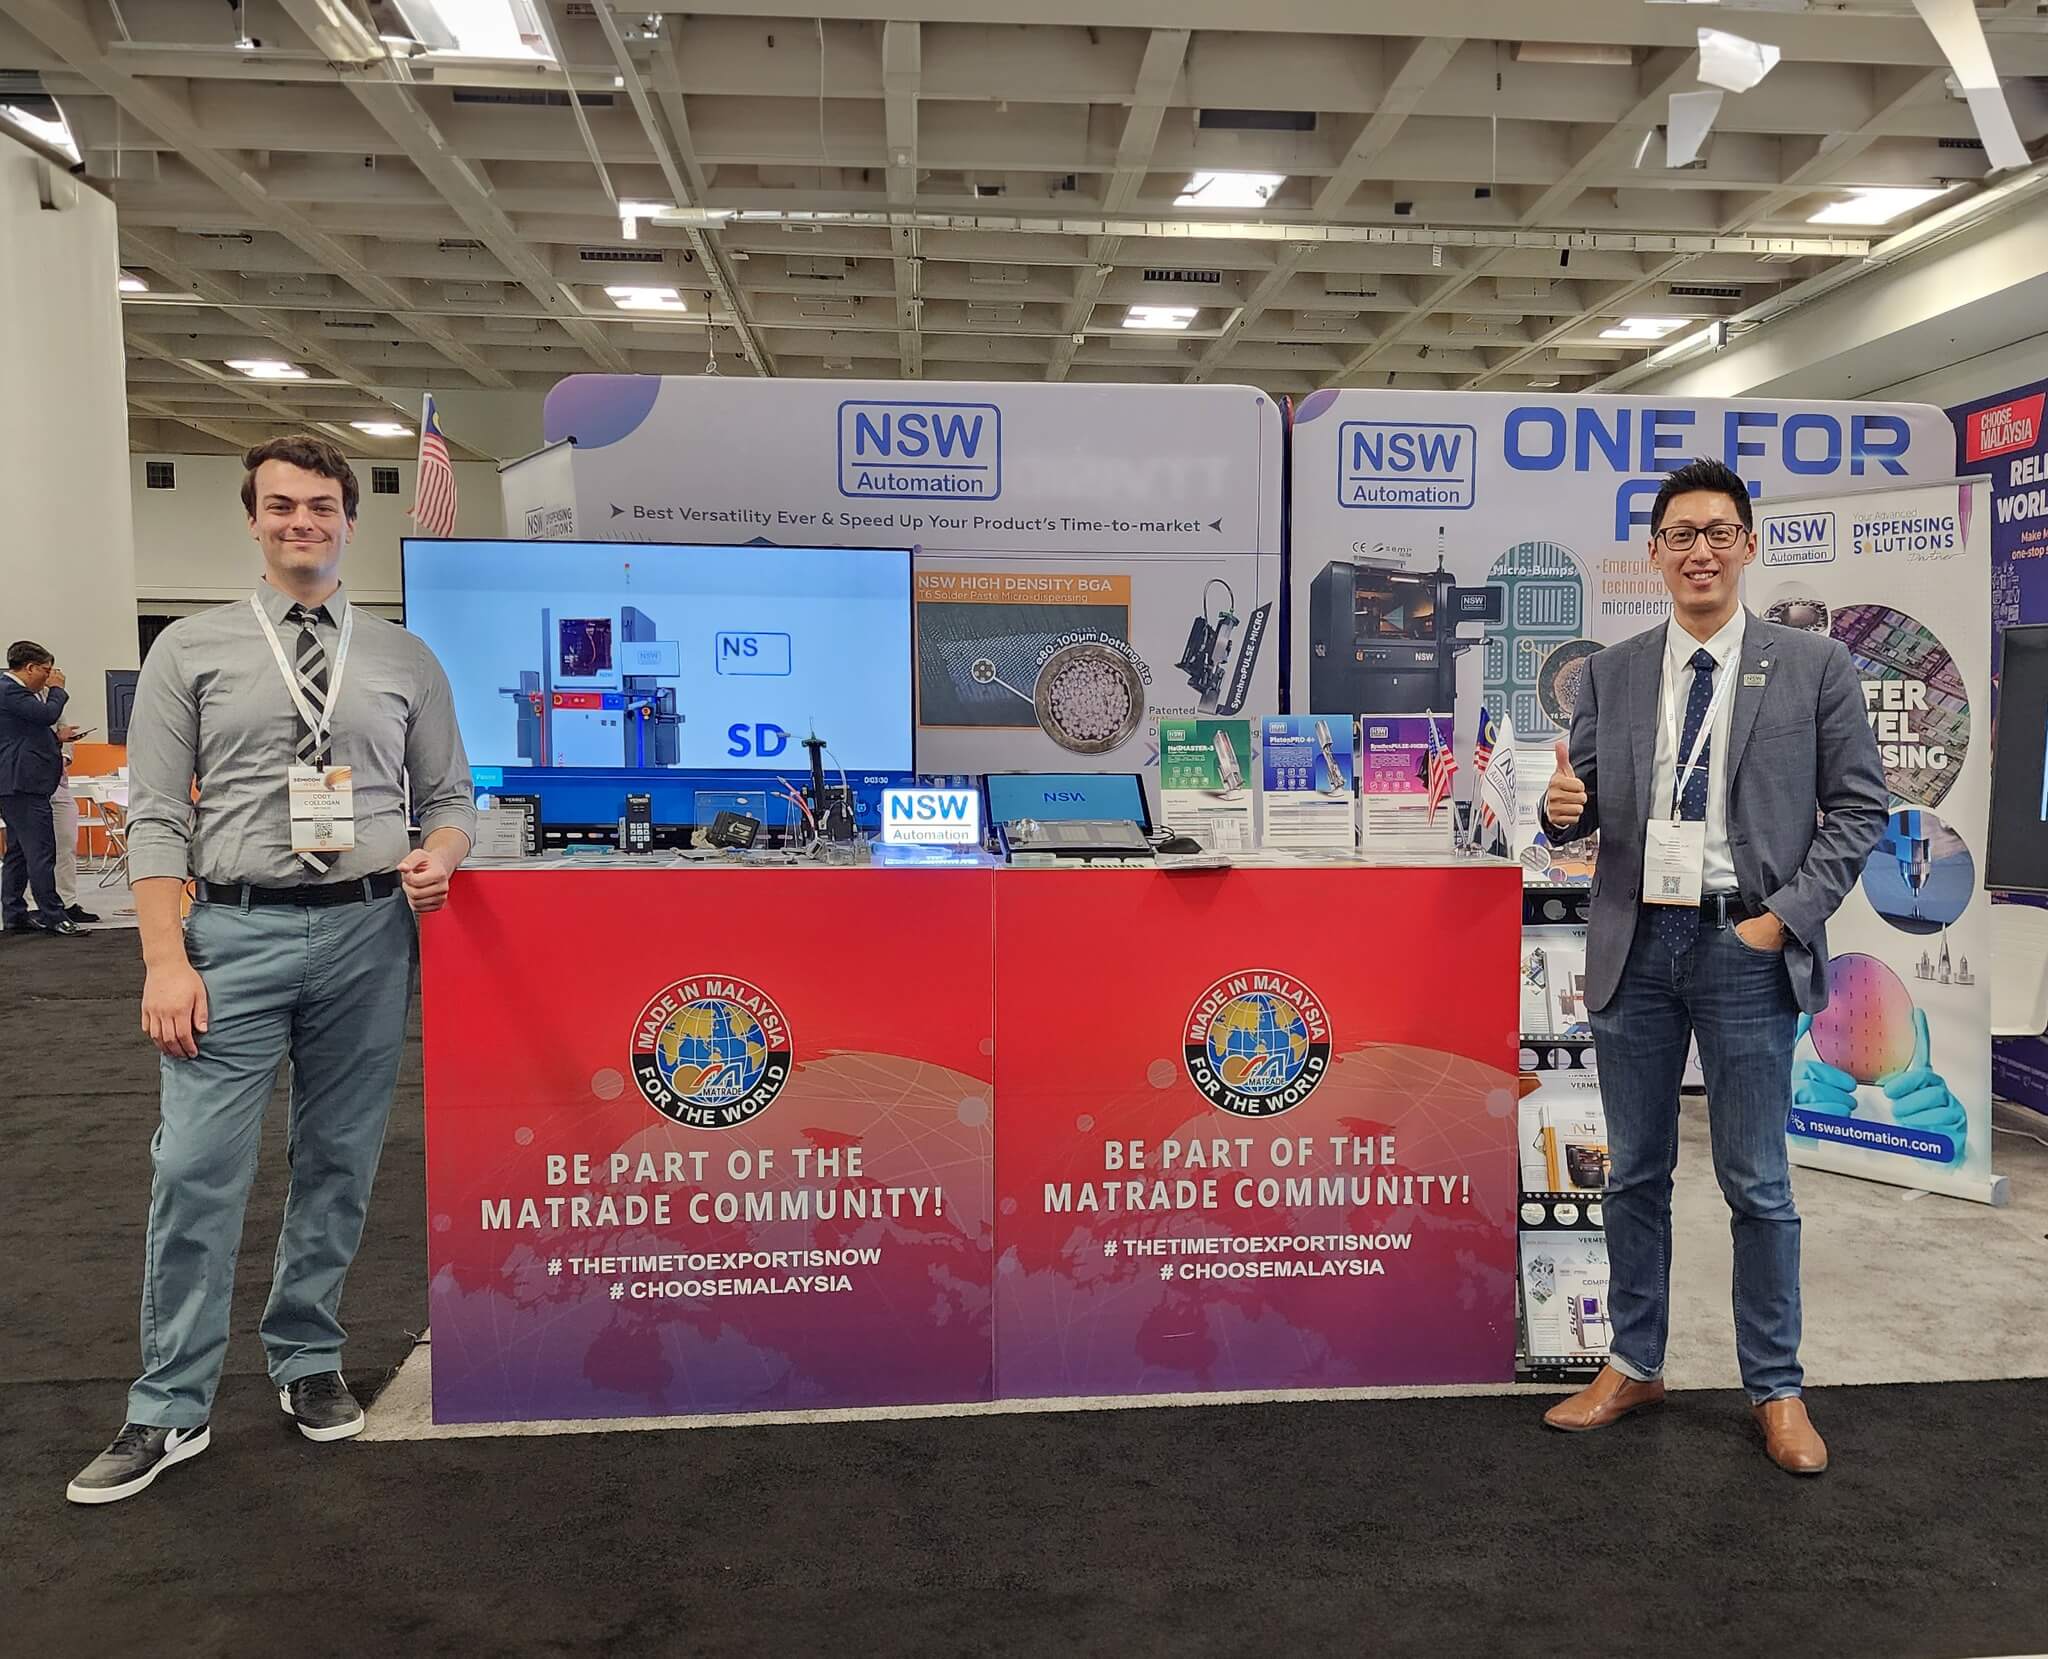 NSW Automation Exhibits at USA SEMICON West 2023